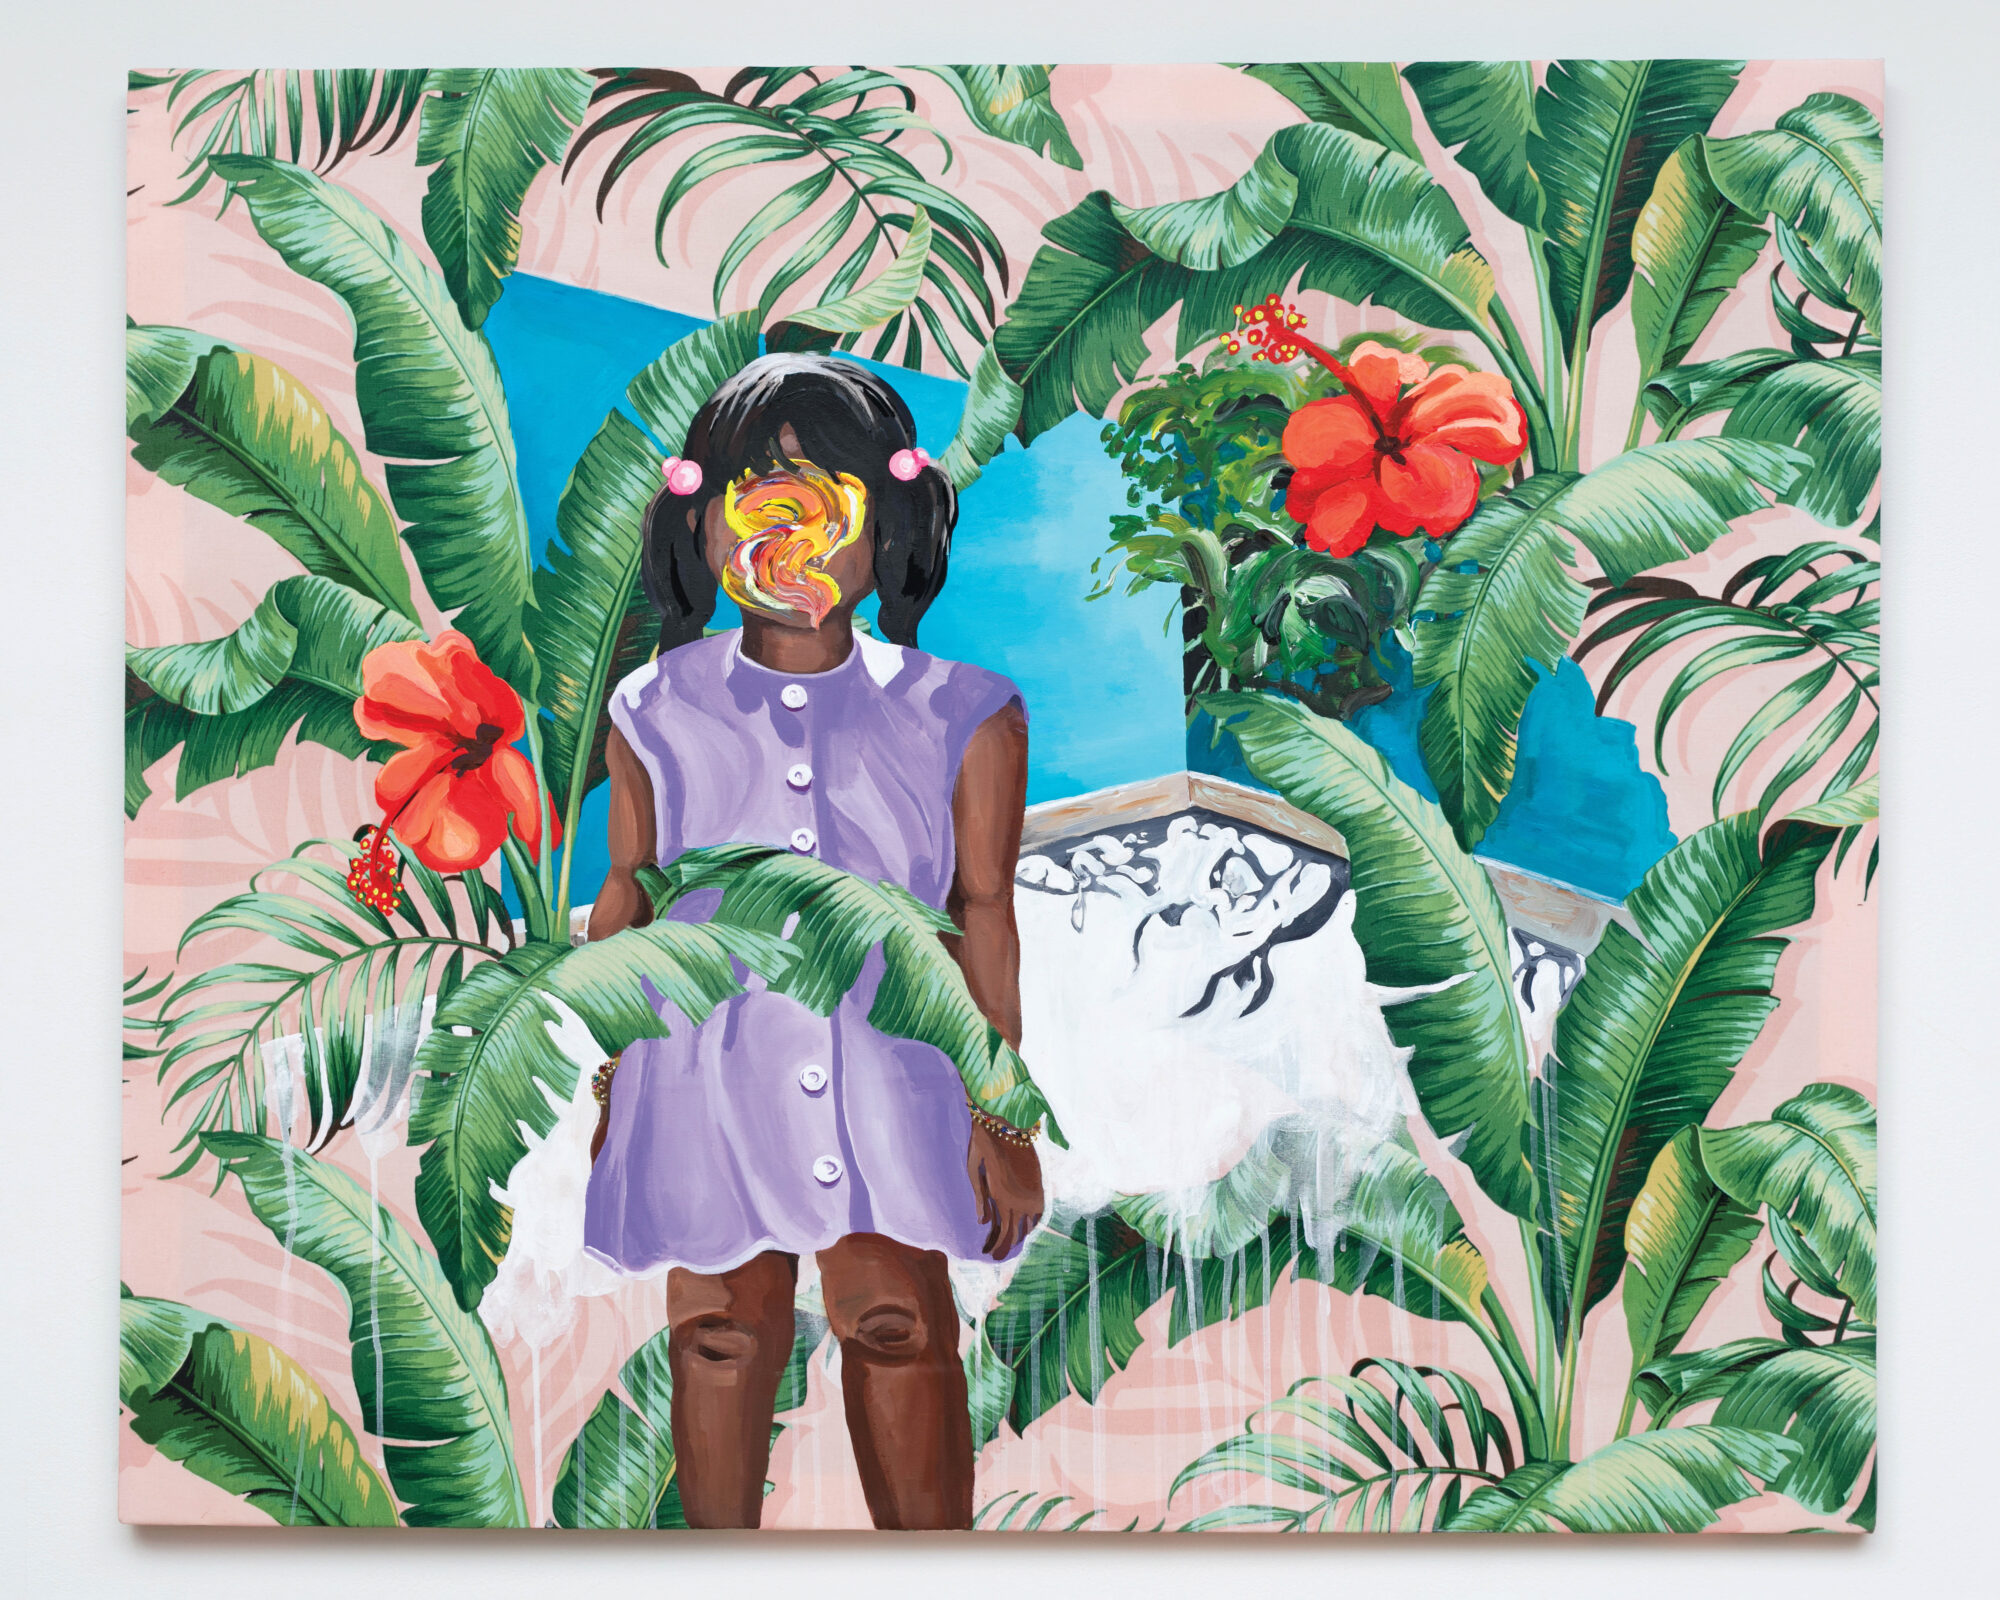 painting of little girl surrounded by palms